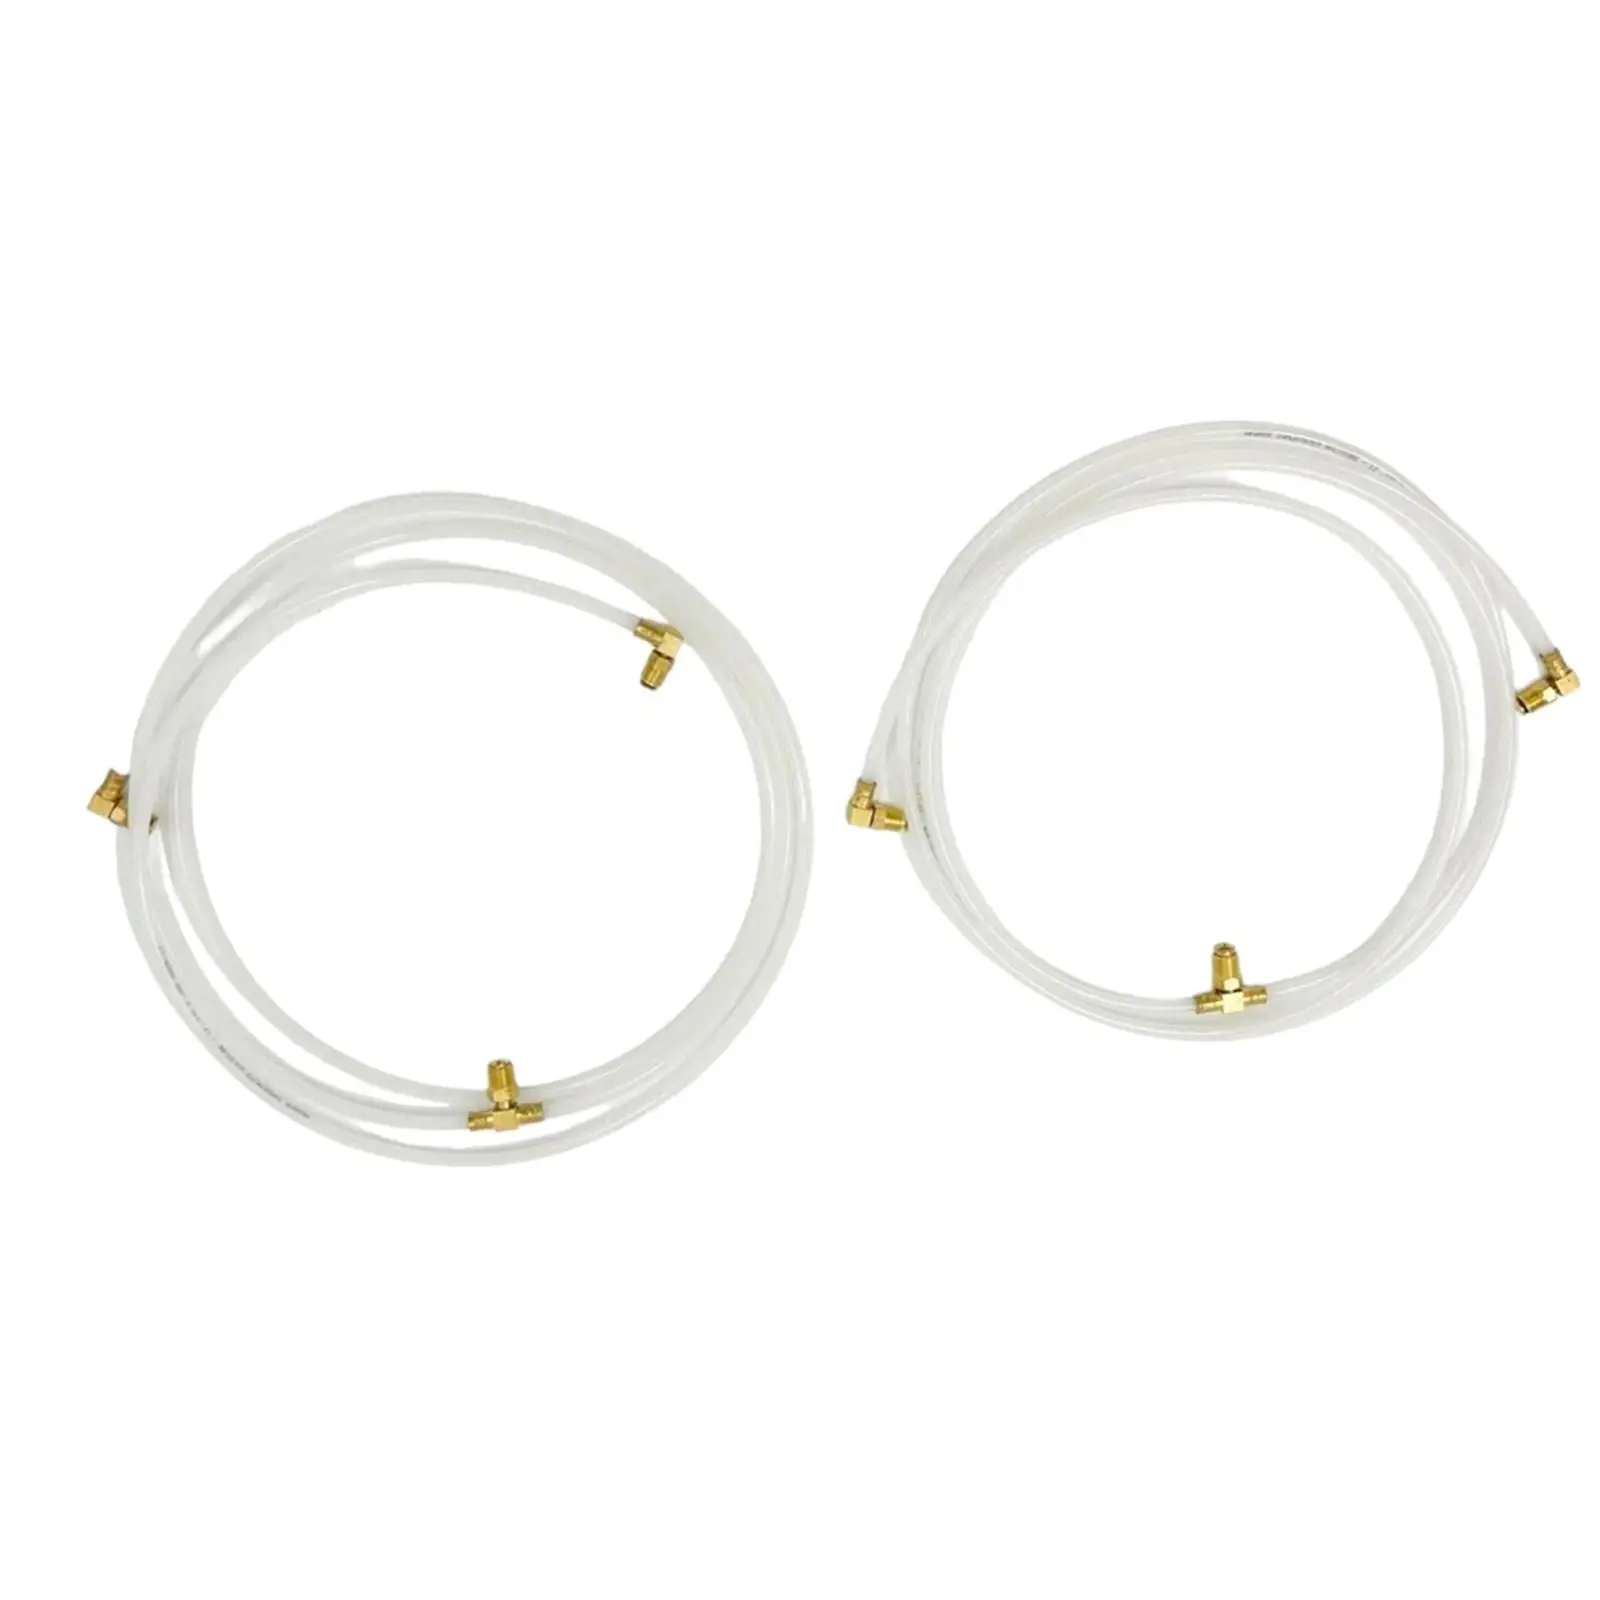 Convertible Top Hydraulic Fluid Hose Line Ho-white-set Pair Hoses for Chevrolet Corvair Impala Replacement Accessories